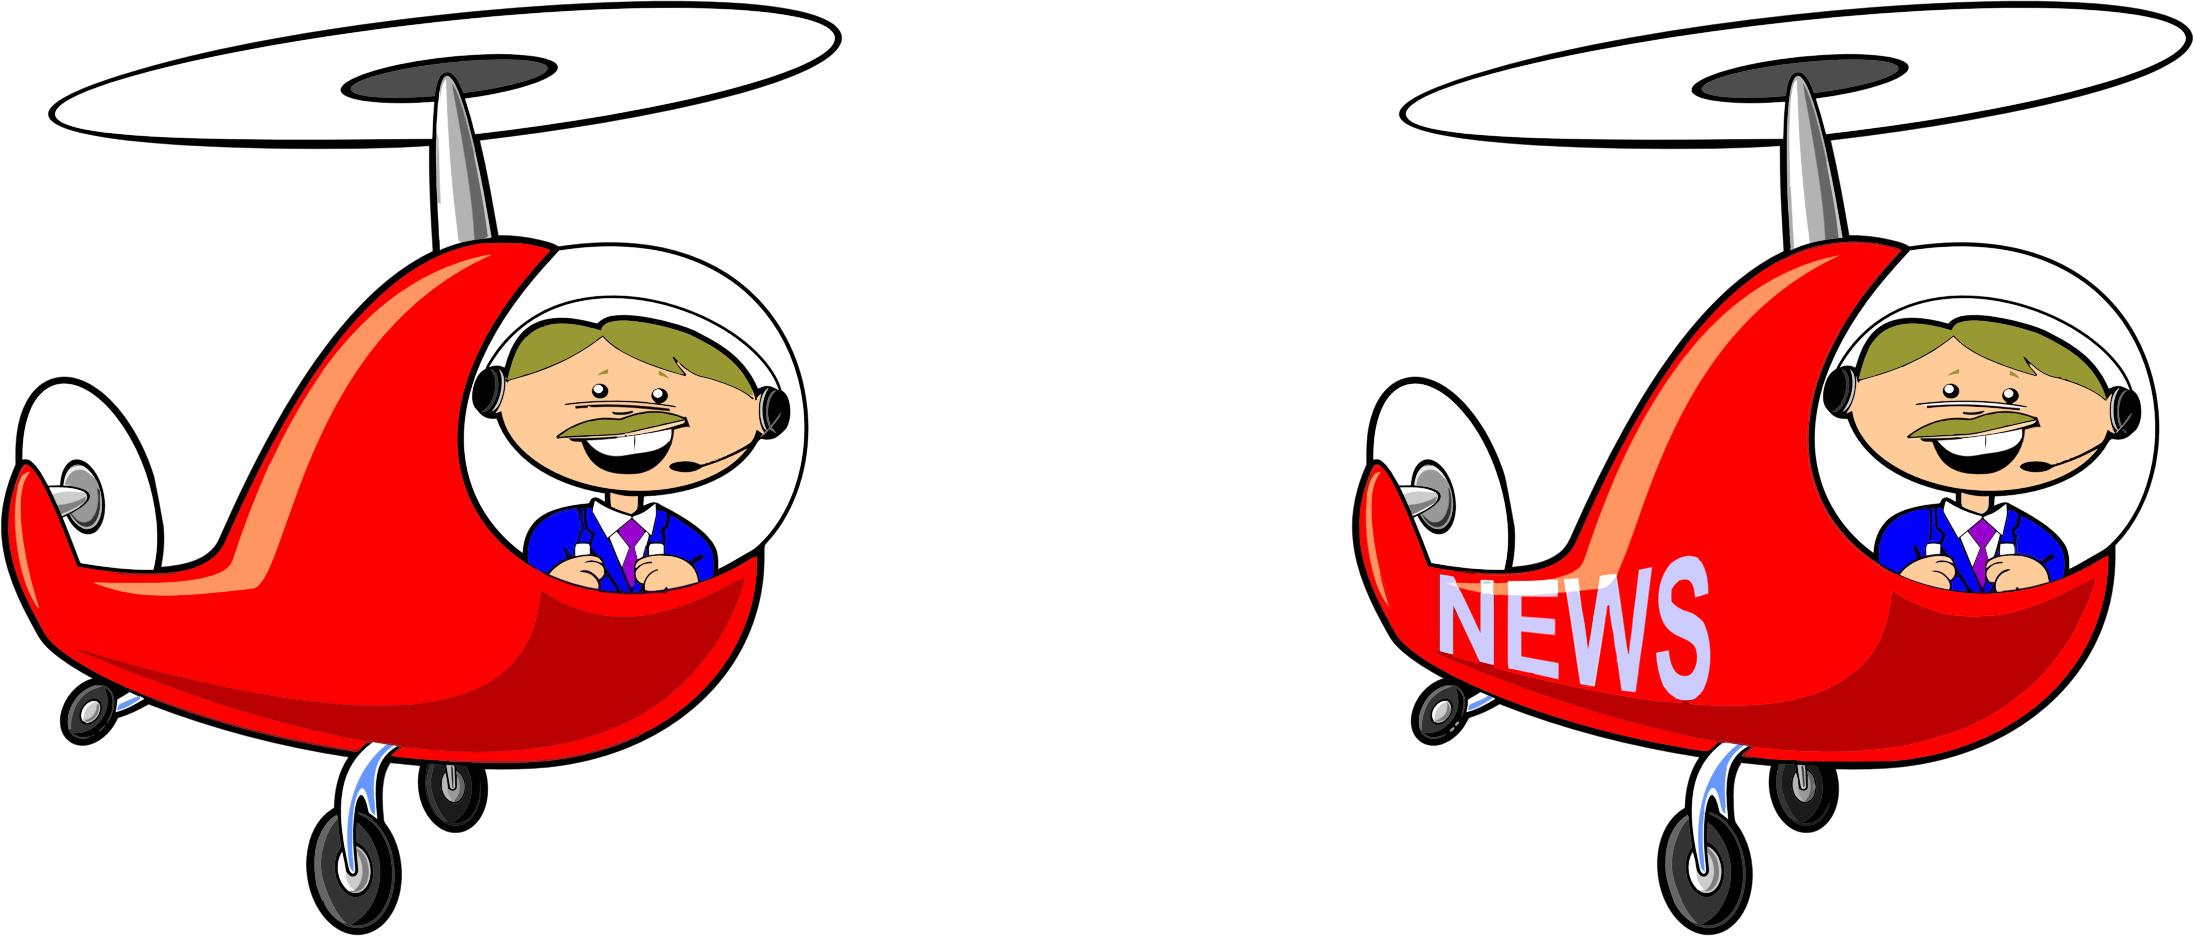 Man In Helicopter png